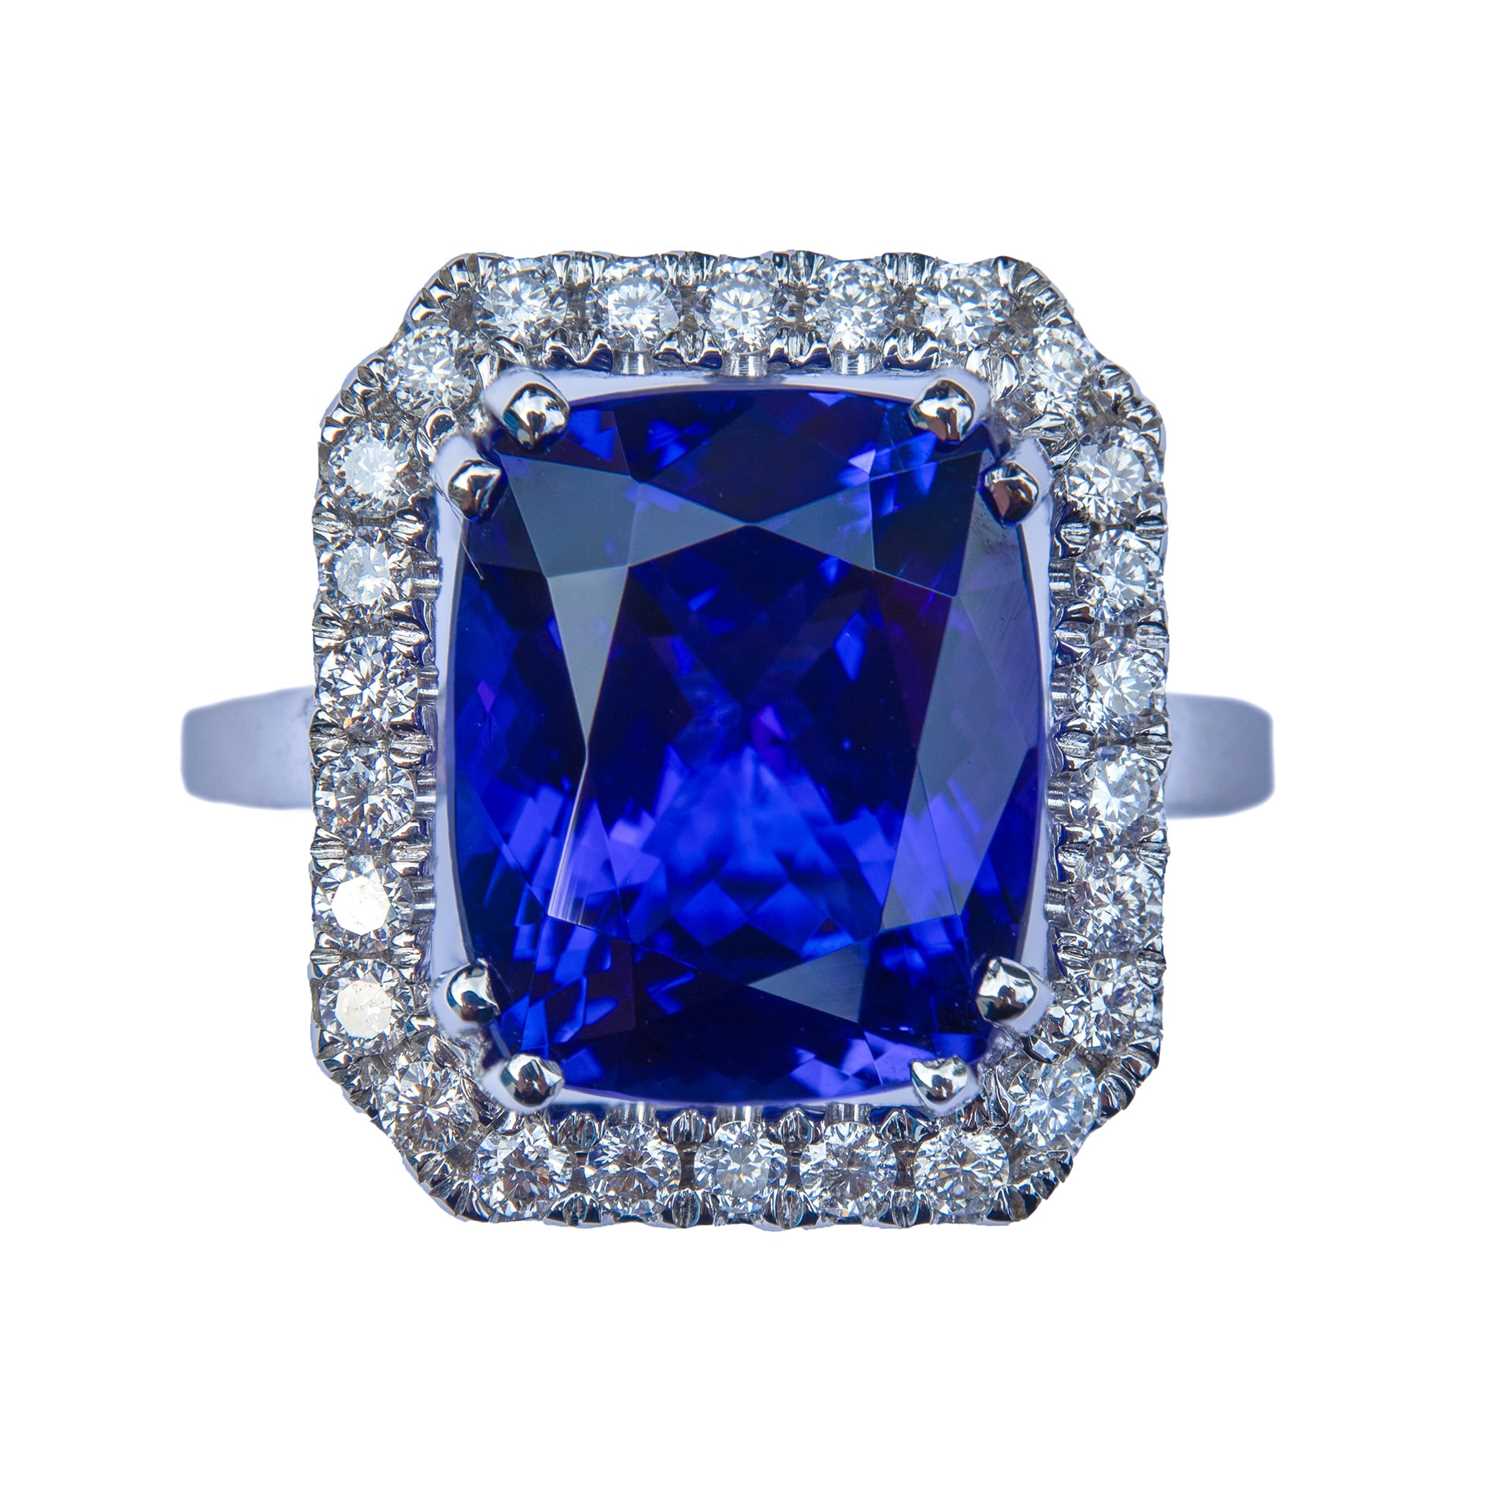 Lot 3 - An 18ct white gold tanzanite and diamond cluster ring